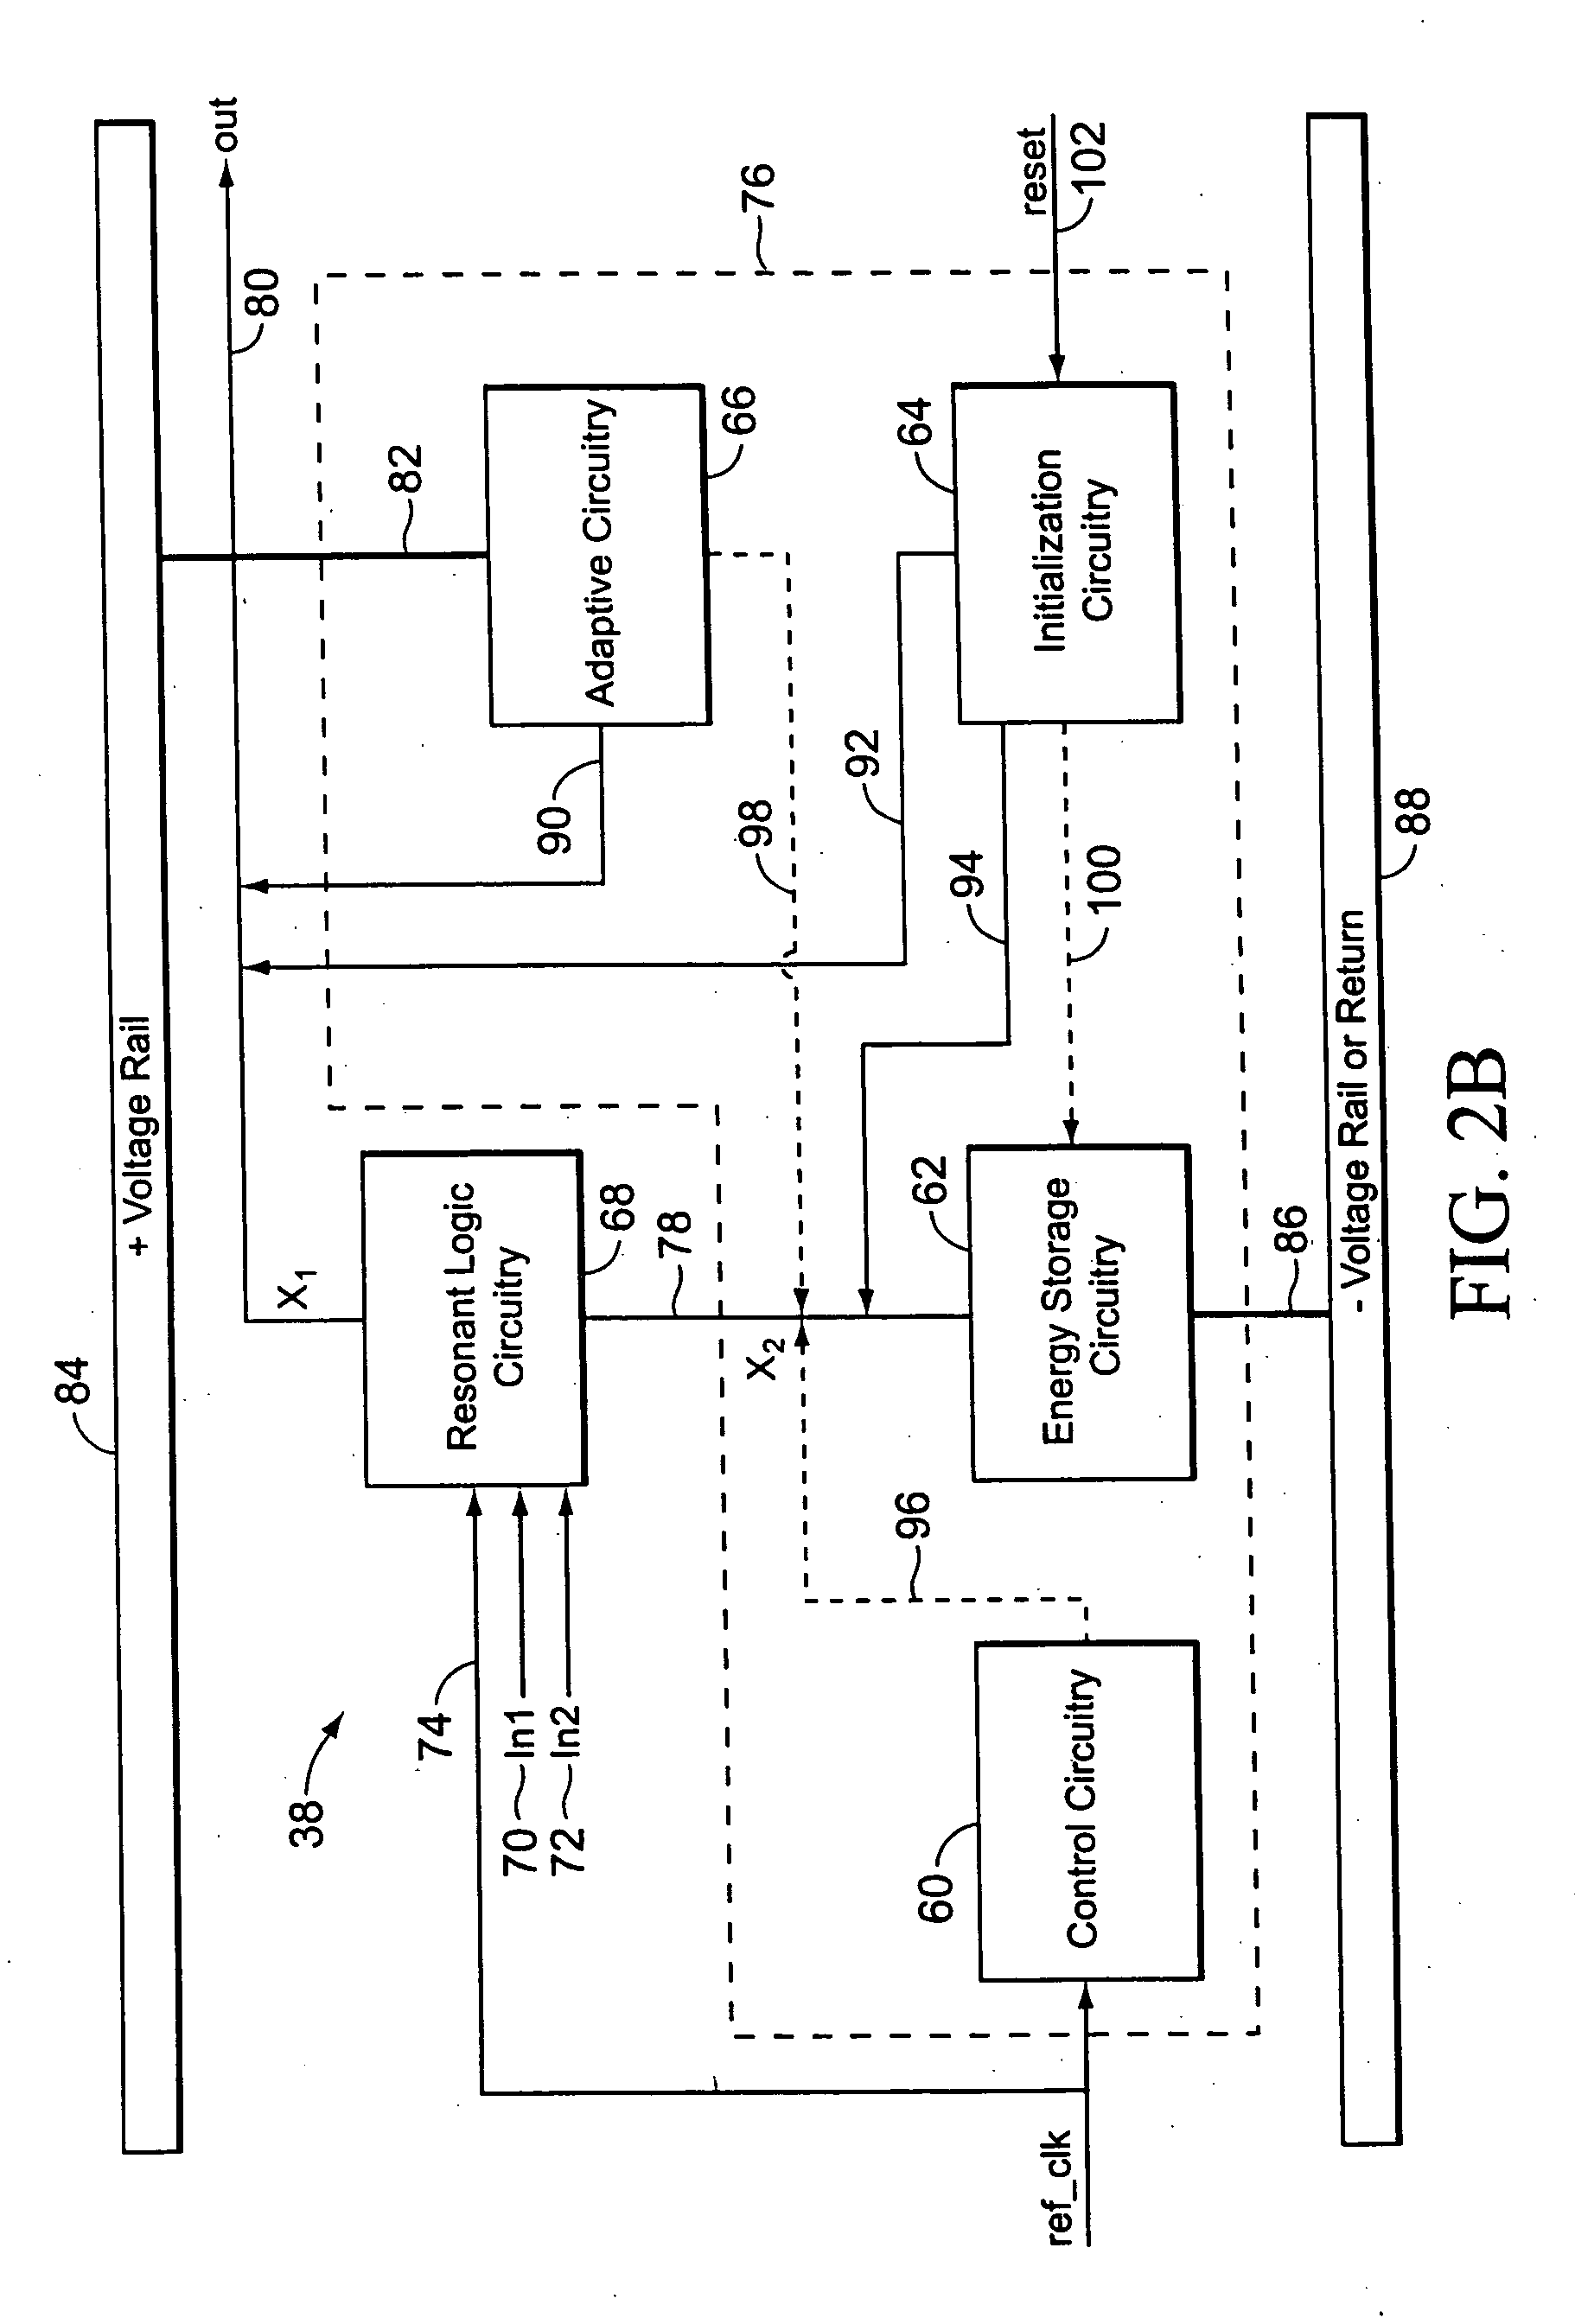 Resonant logic and the implementation of low power digital integrated circuits